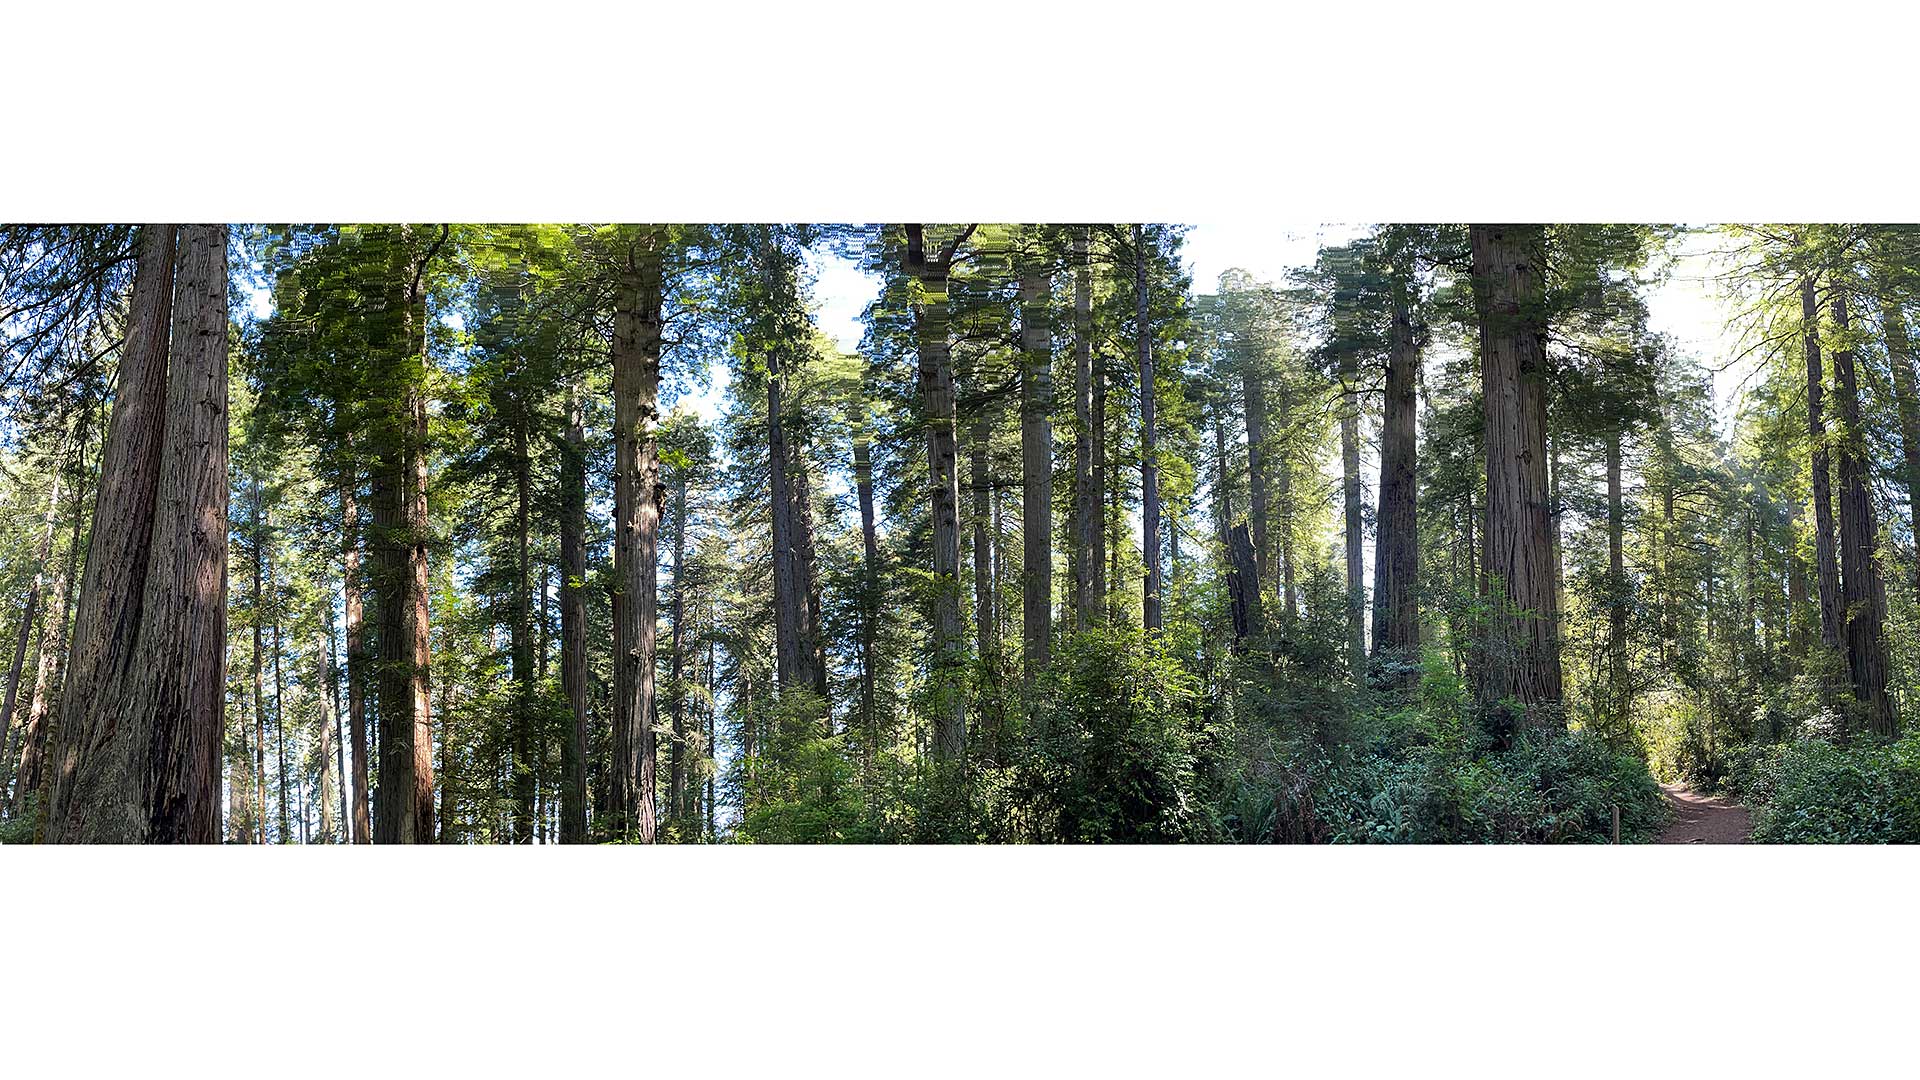 Panorama of Ancient Redwood Forest